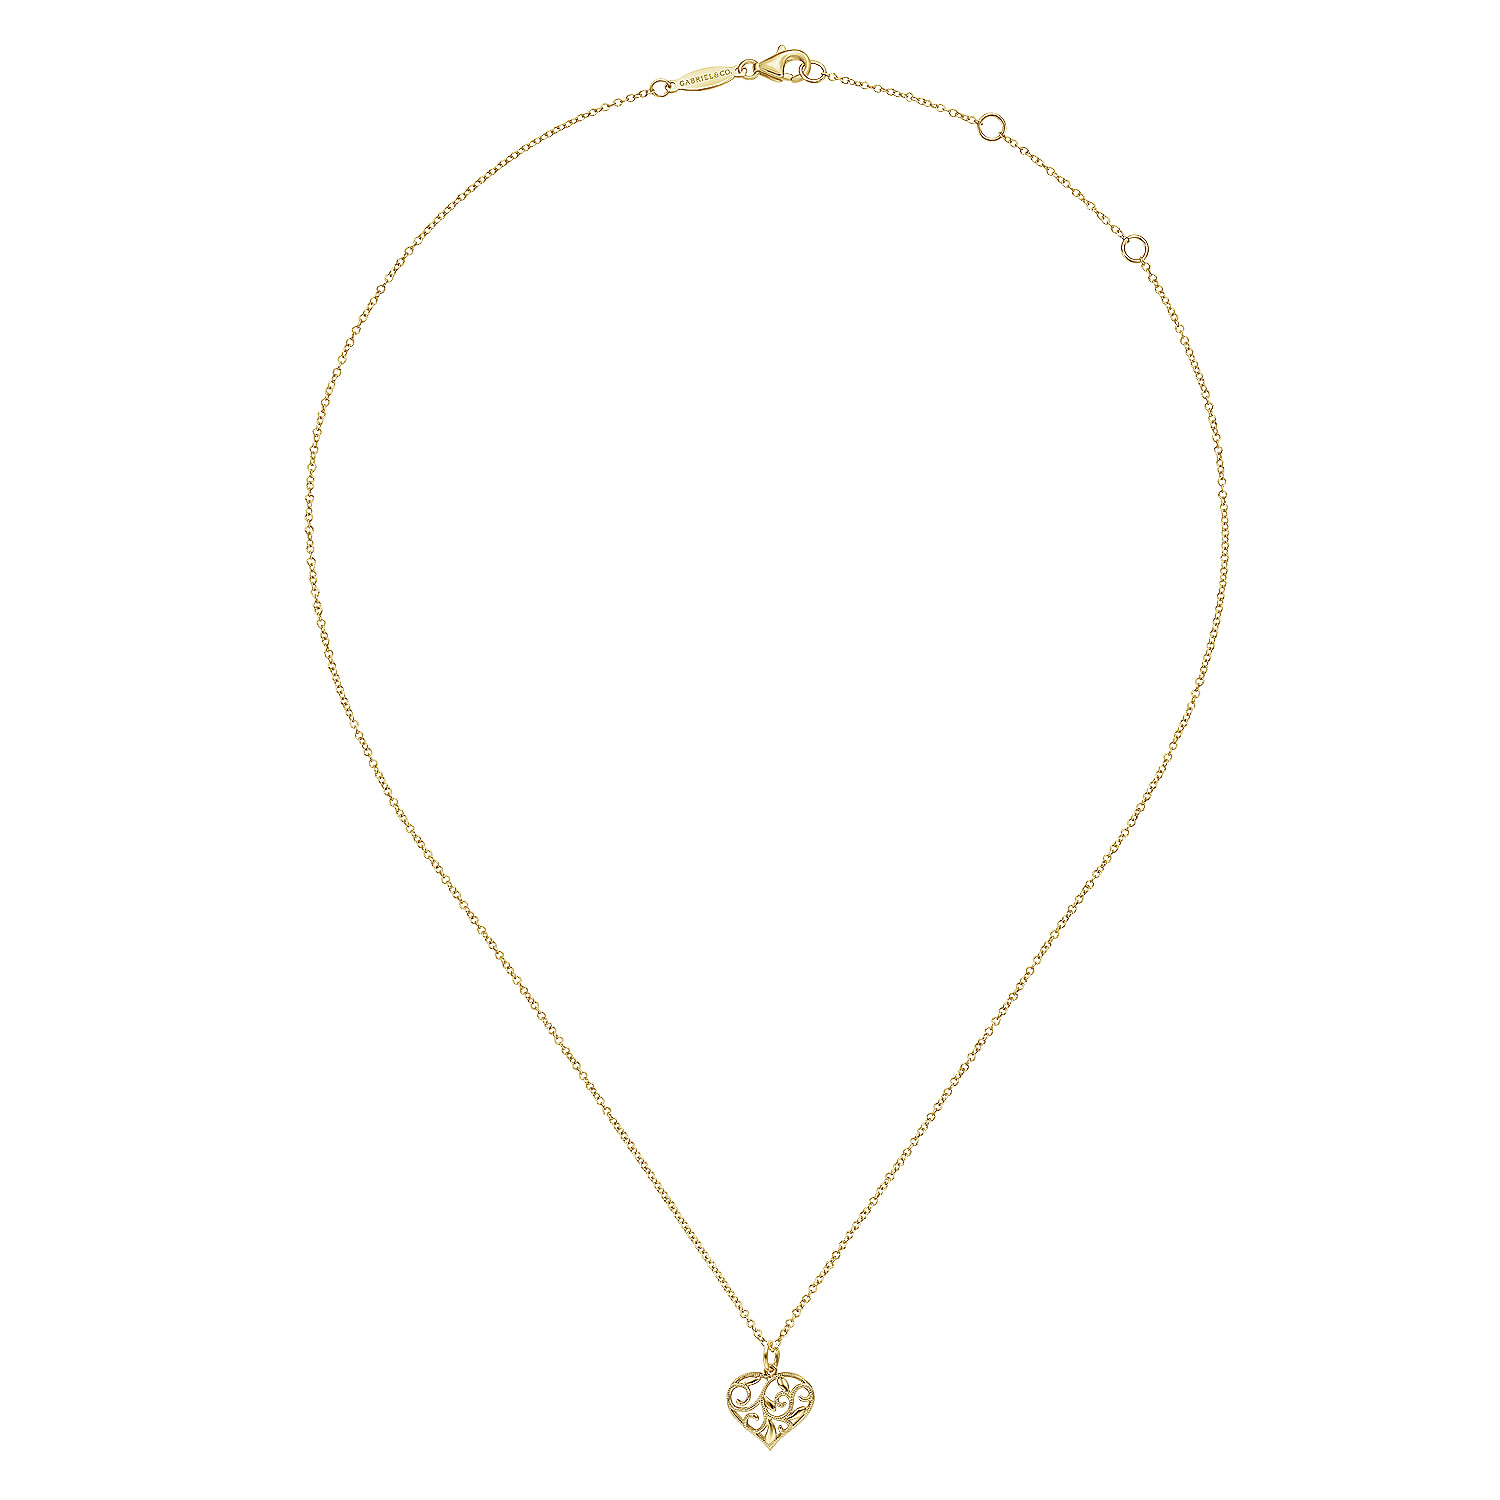 14K Yellow Gold Swirling Heart Pendant Necklace